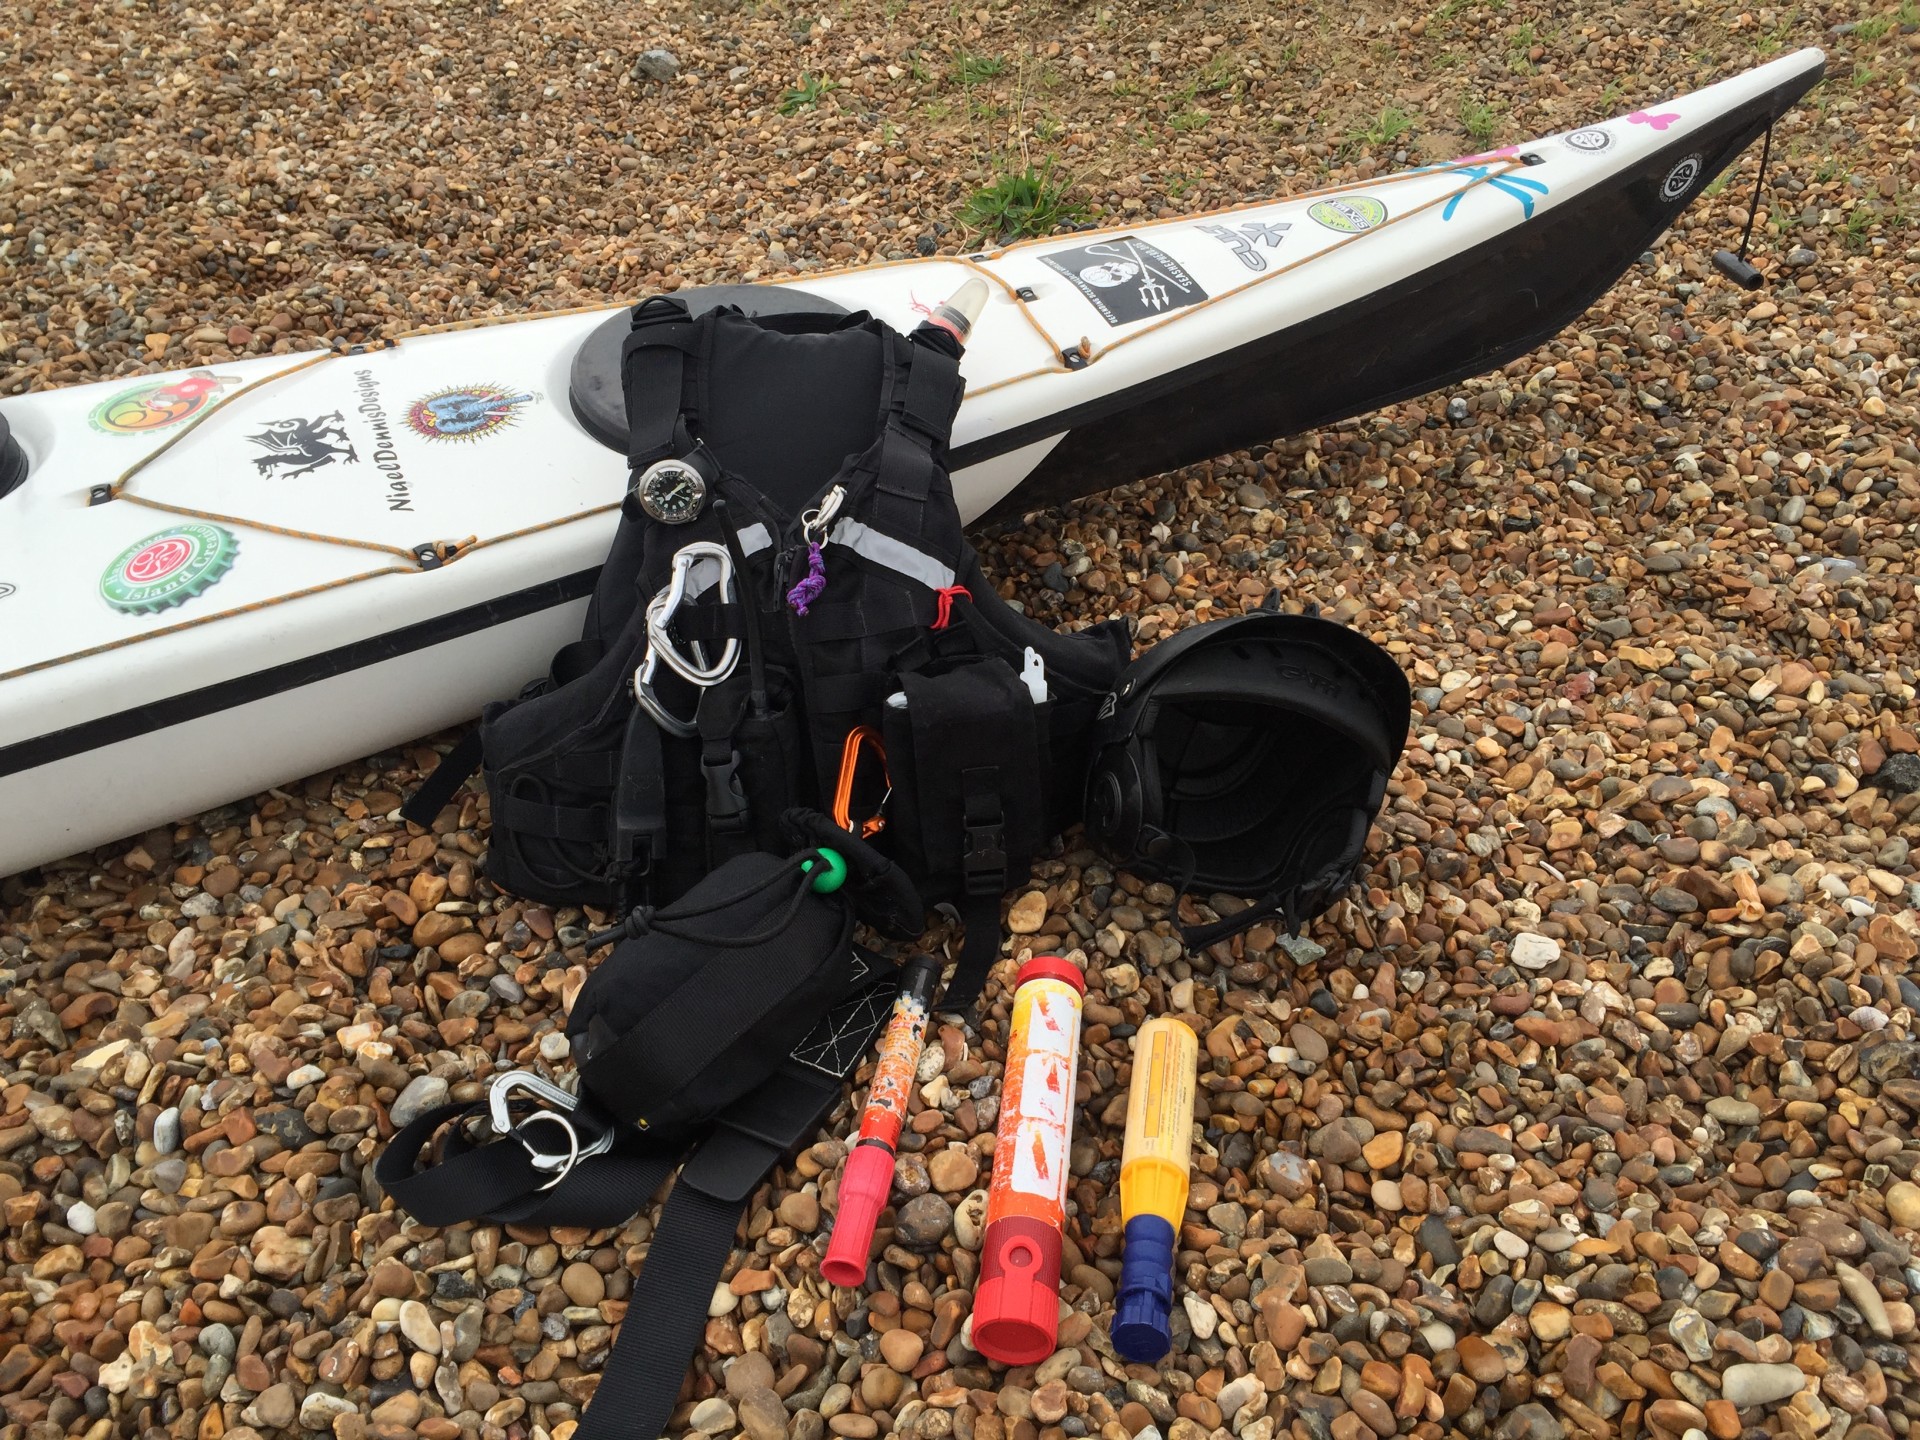 Equipment carried by responsible sea kayakers.